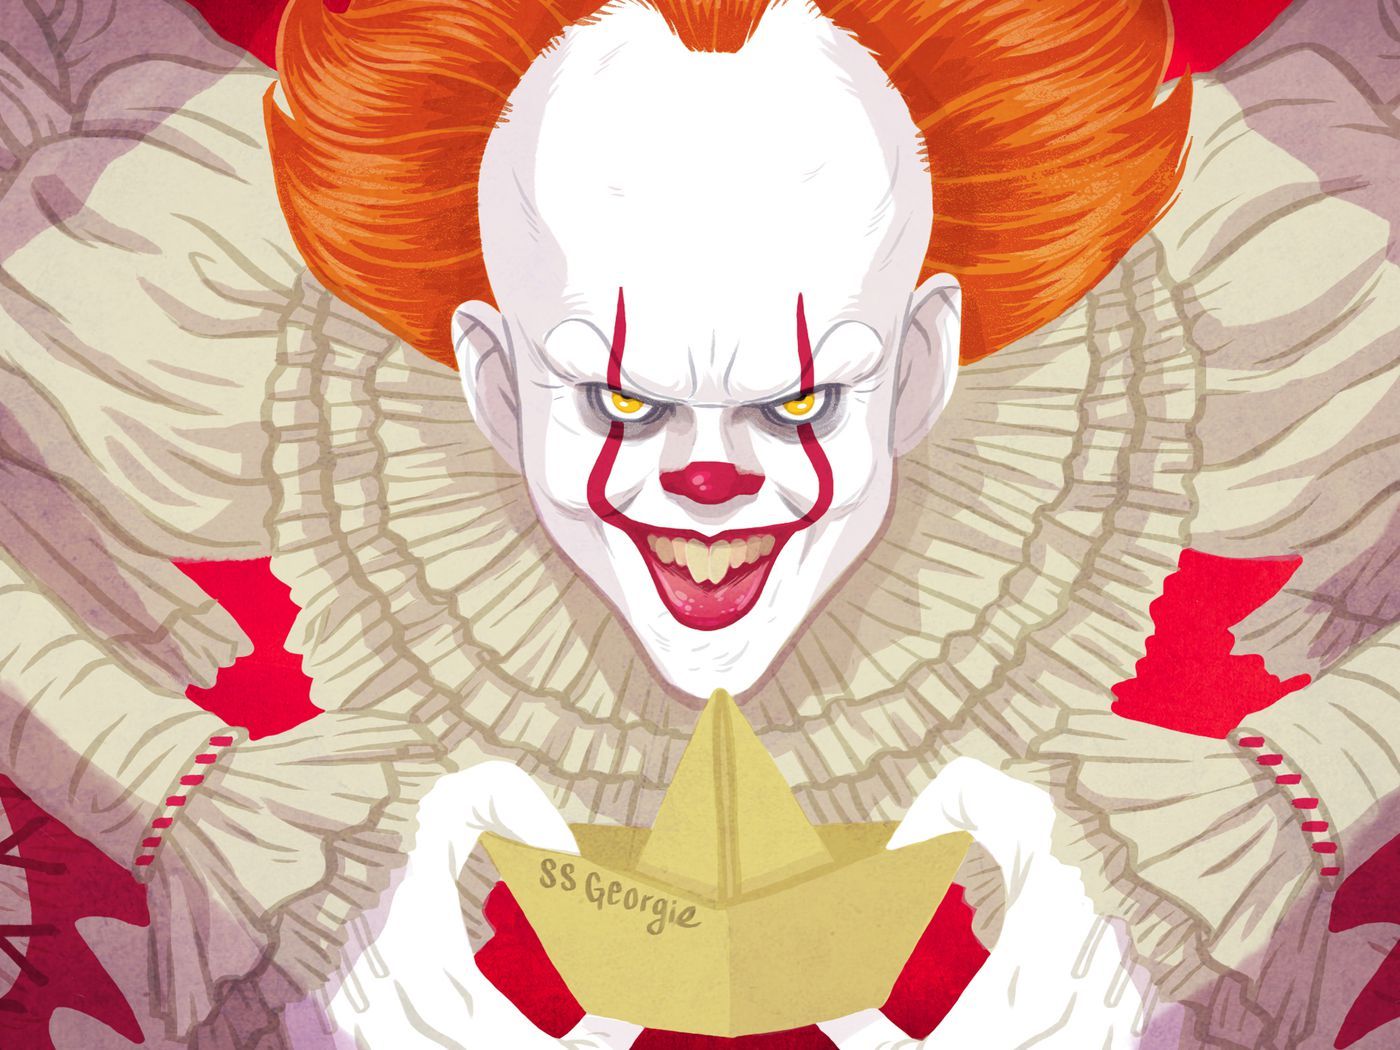 Pennywise From 'It' Is a Perfect Movie Monster